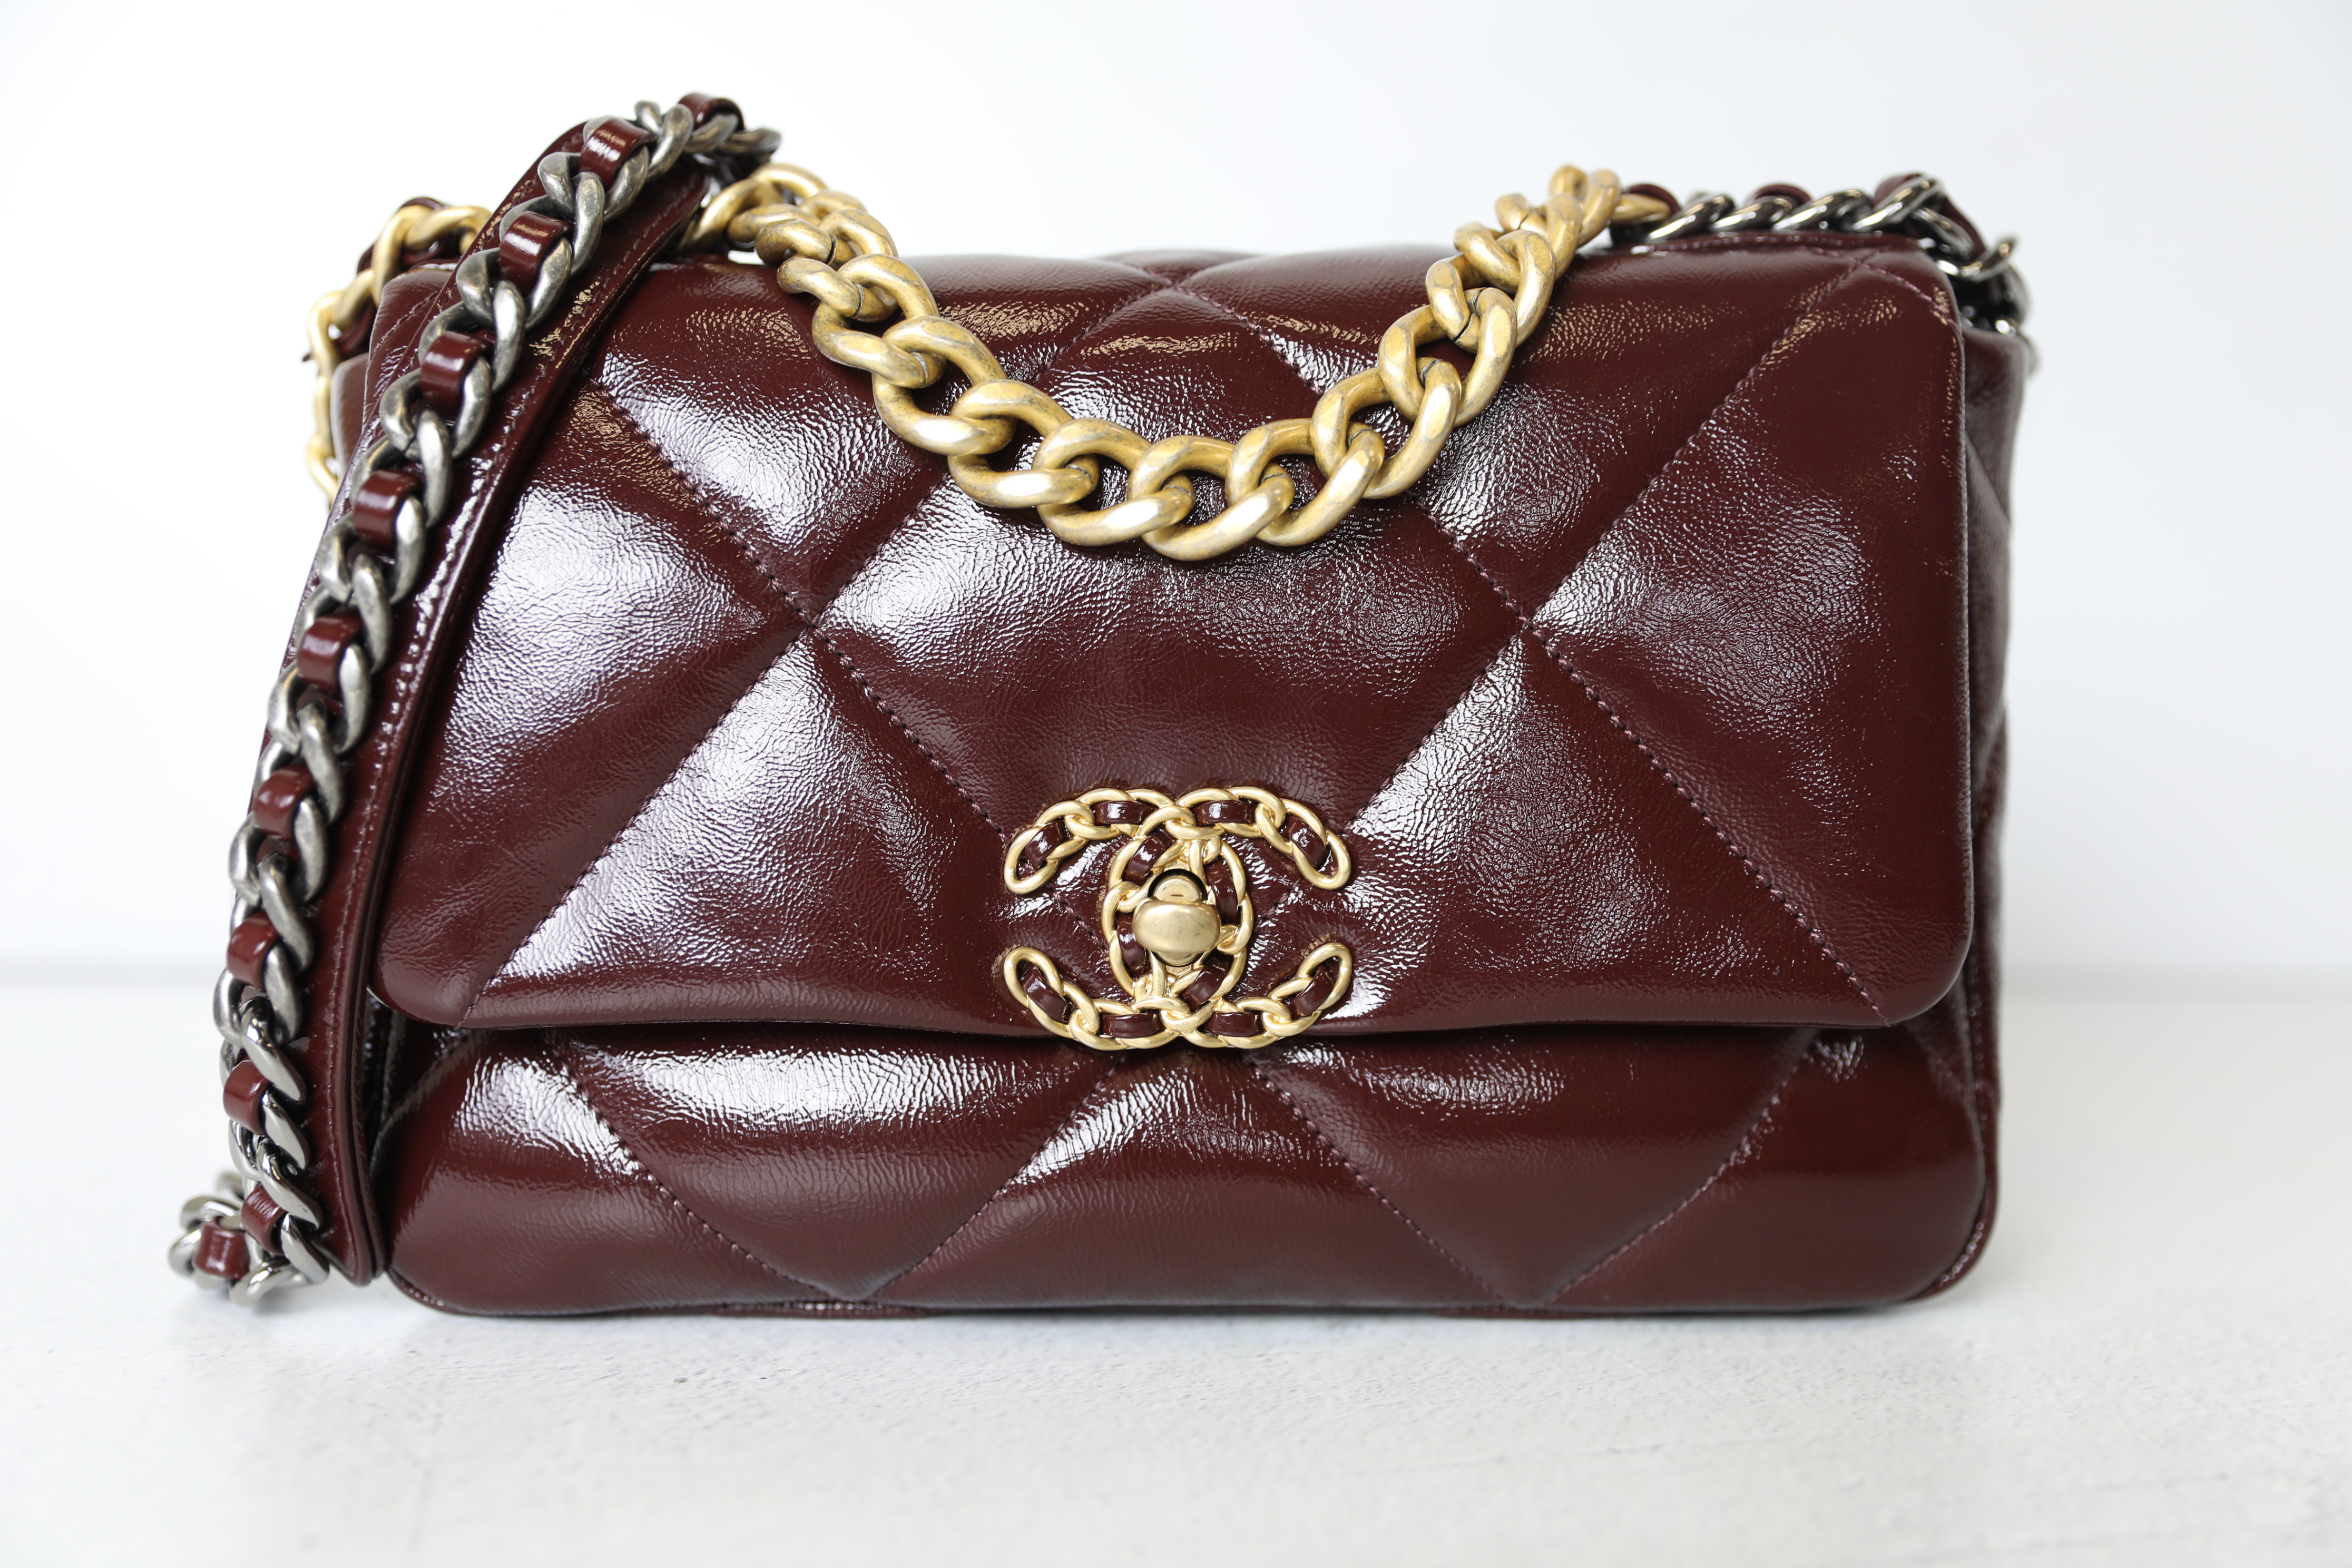 Chanel 19 Small, Maroon Red Glazed Leather, Preowned in Box